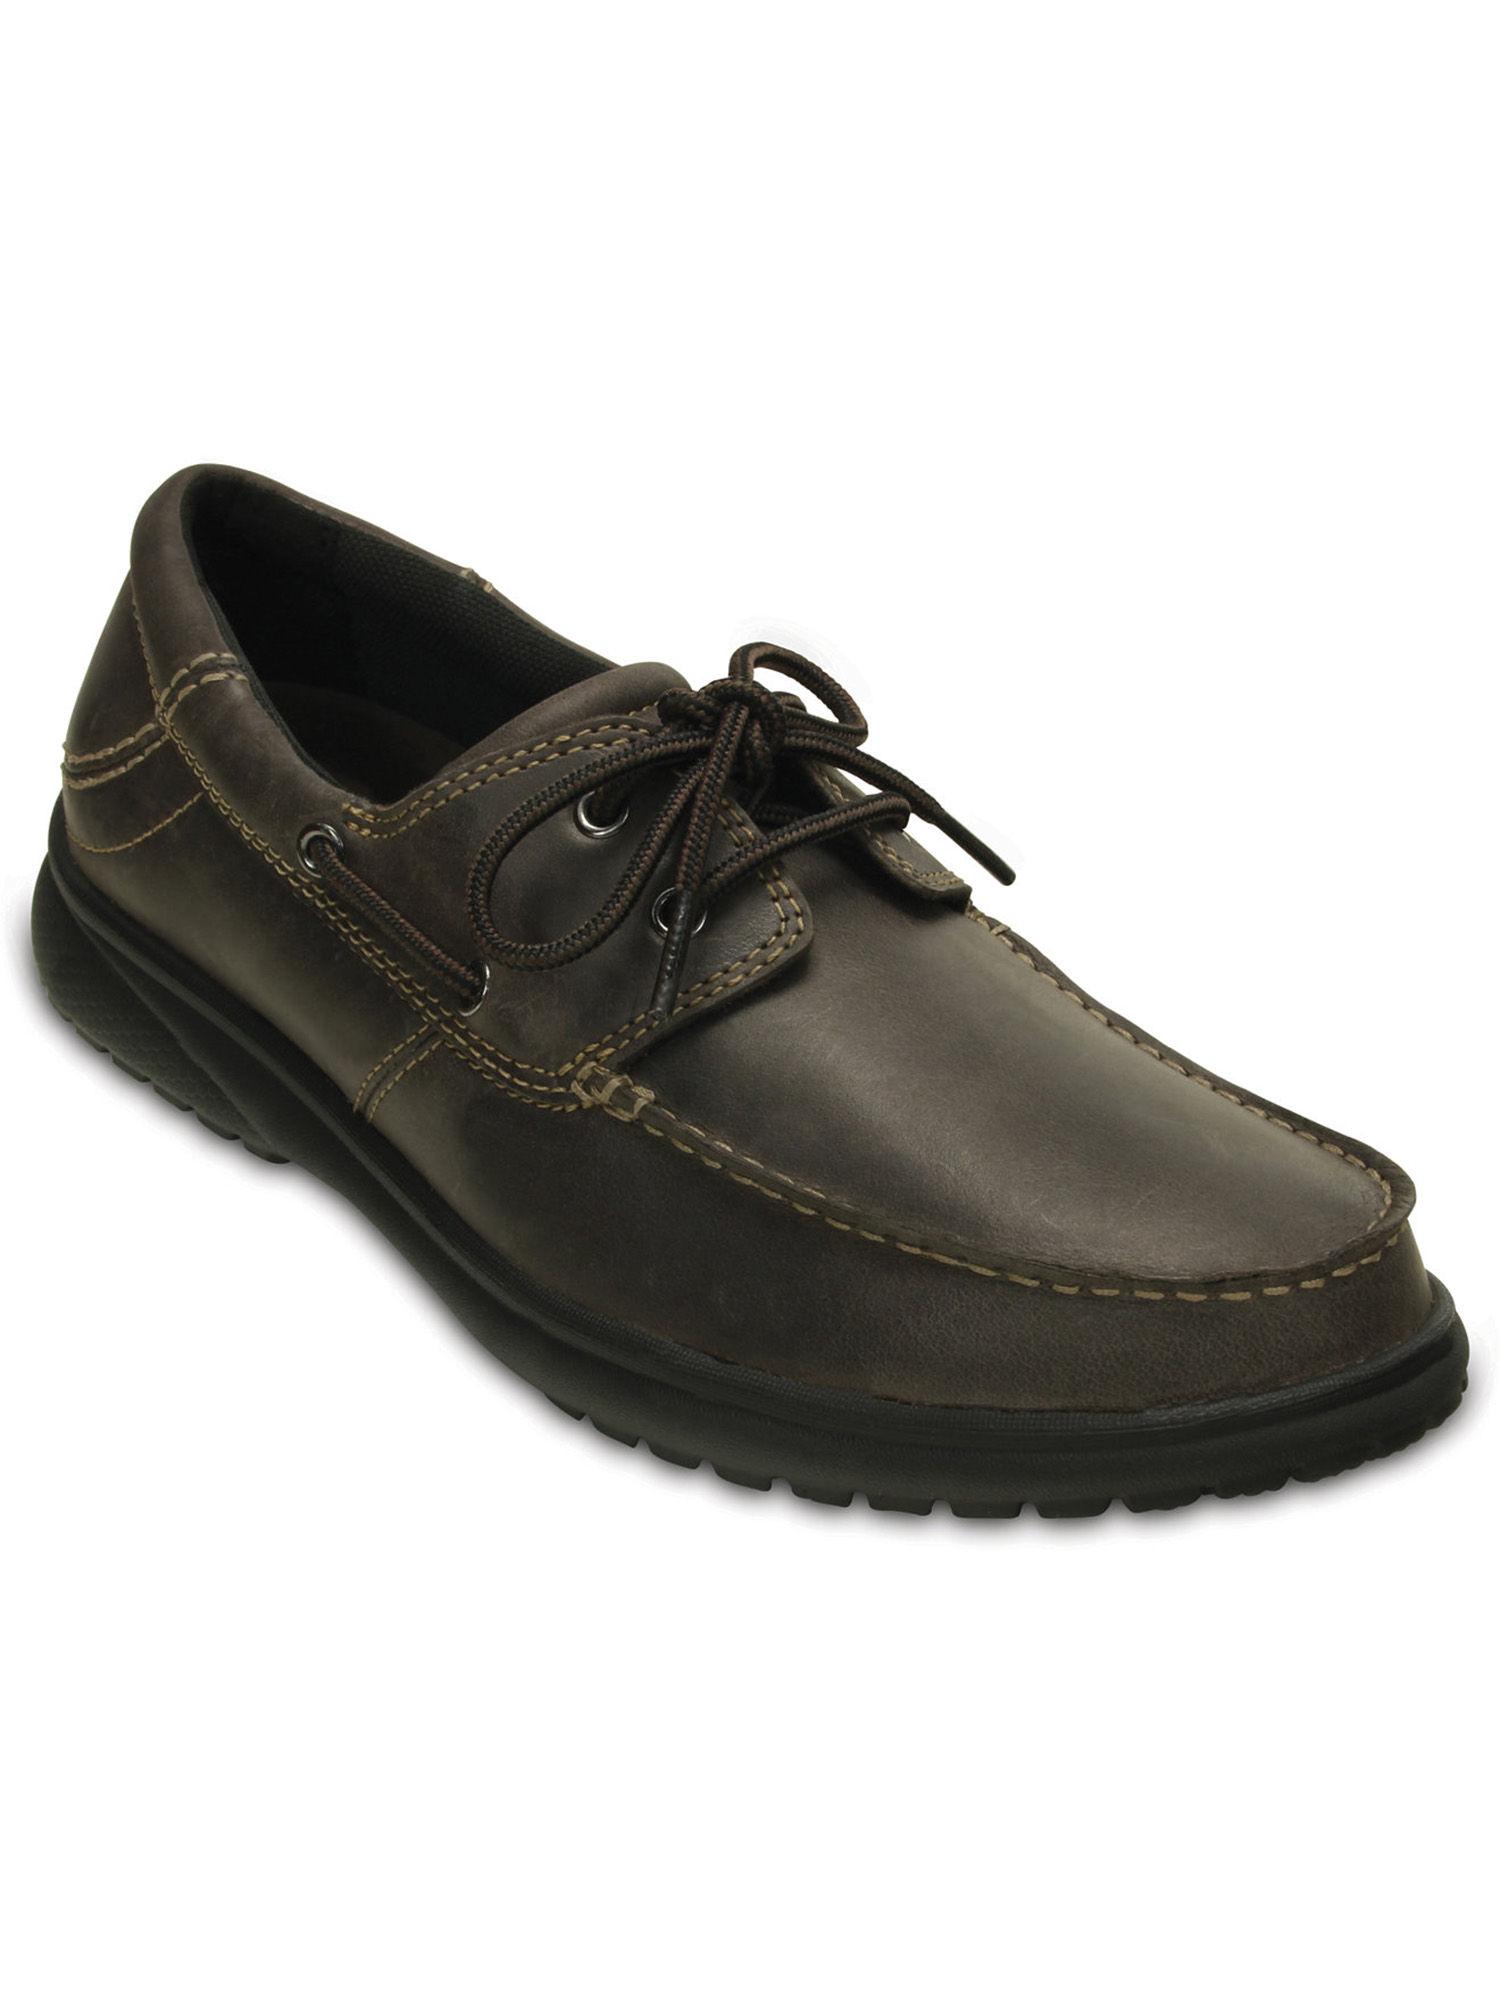 shaw solid brown shoes